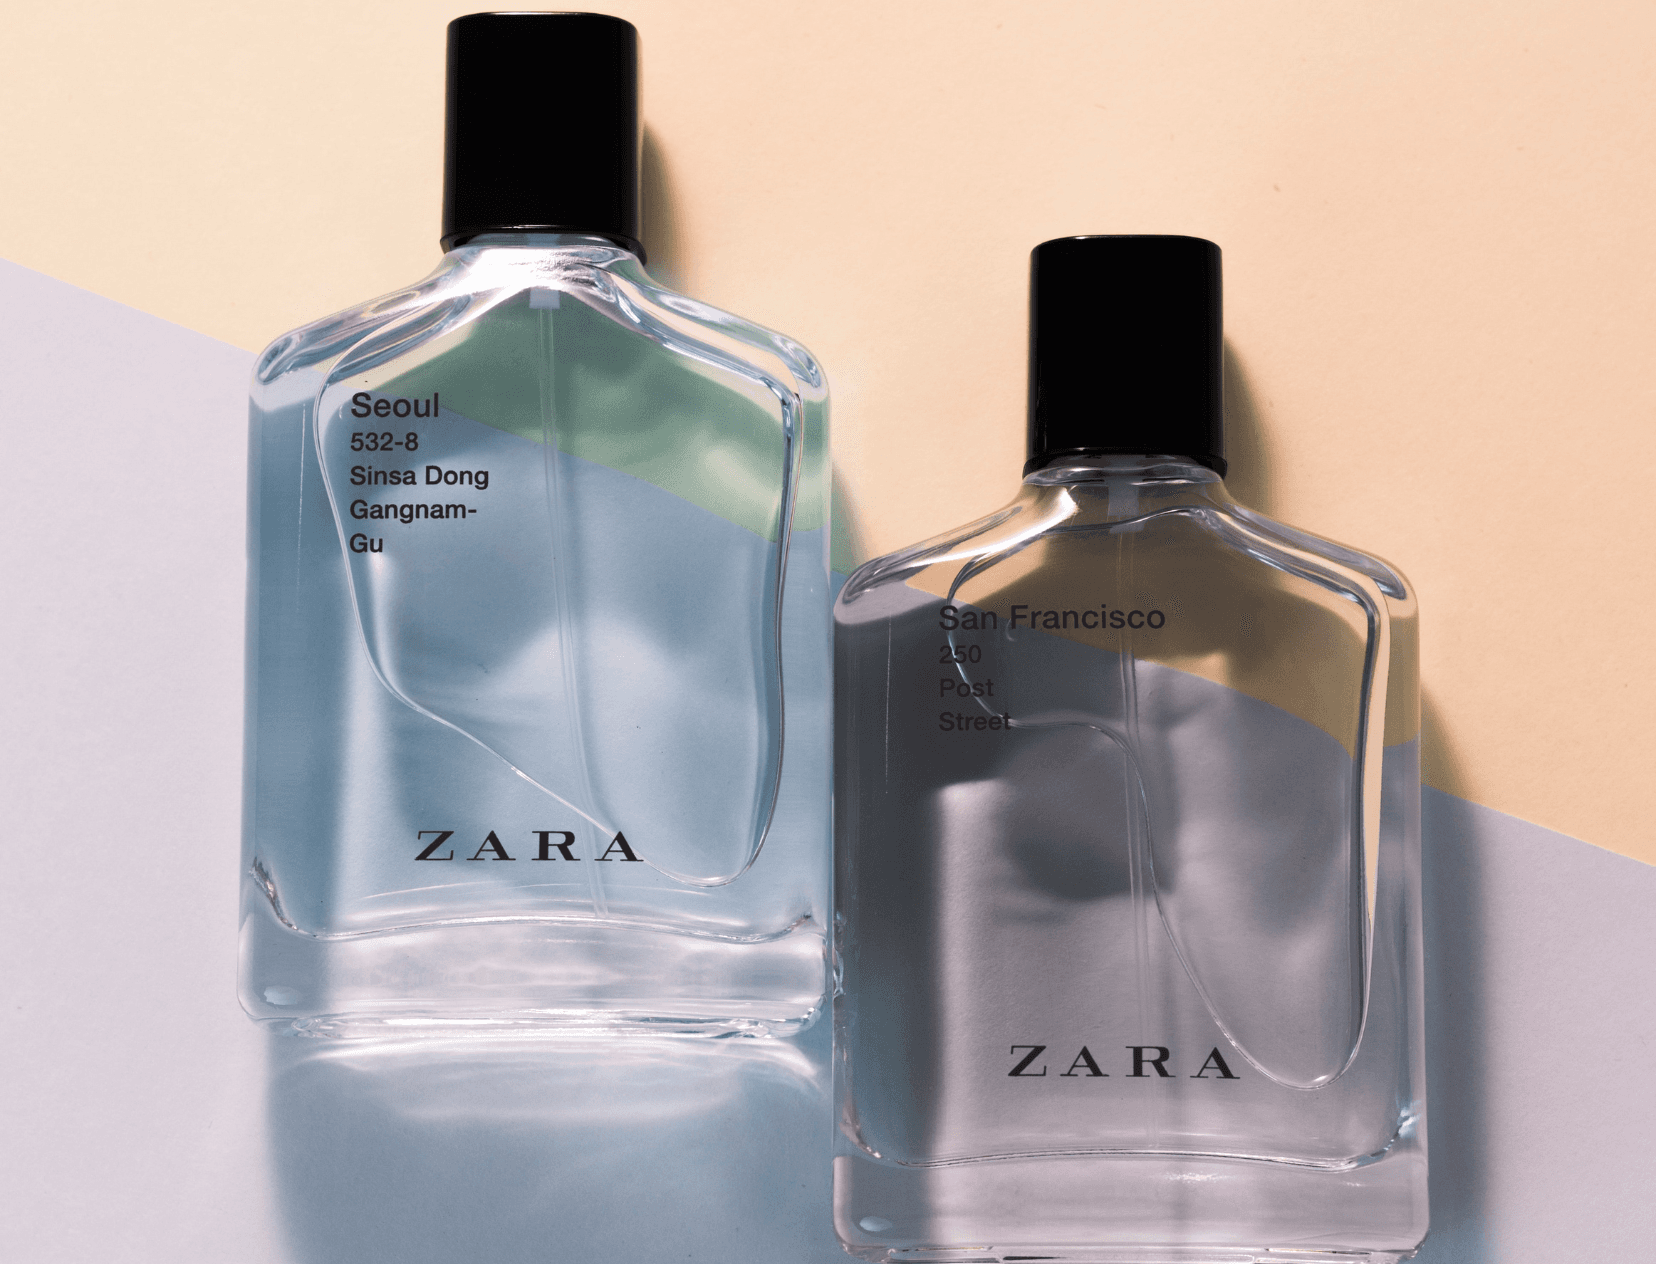 8 Zara Perfume Dupes That Are So Good, You’ll Stop Purchasing The Original!